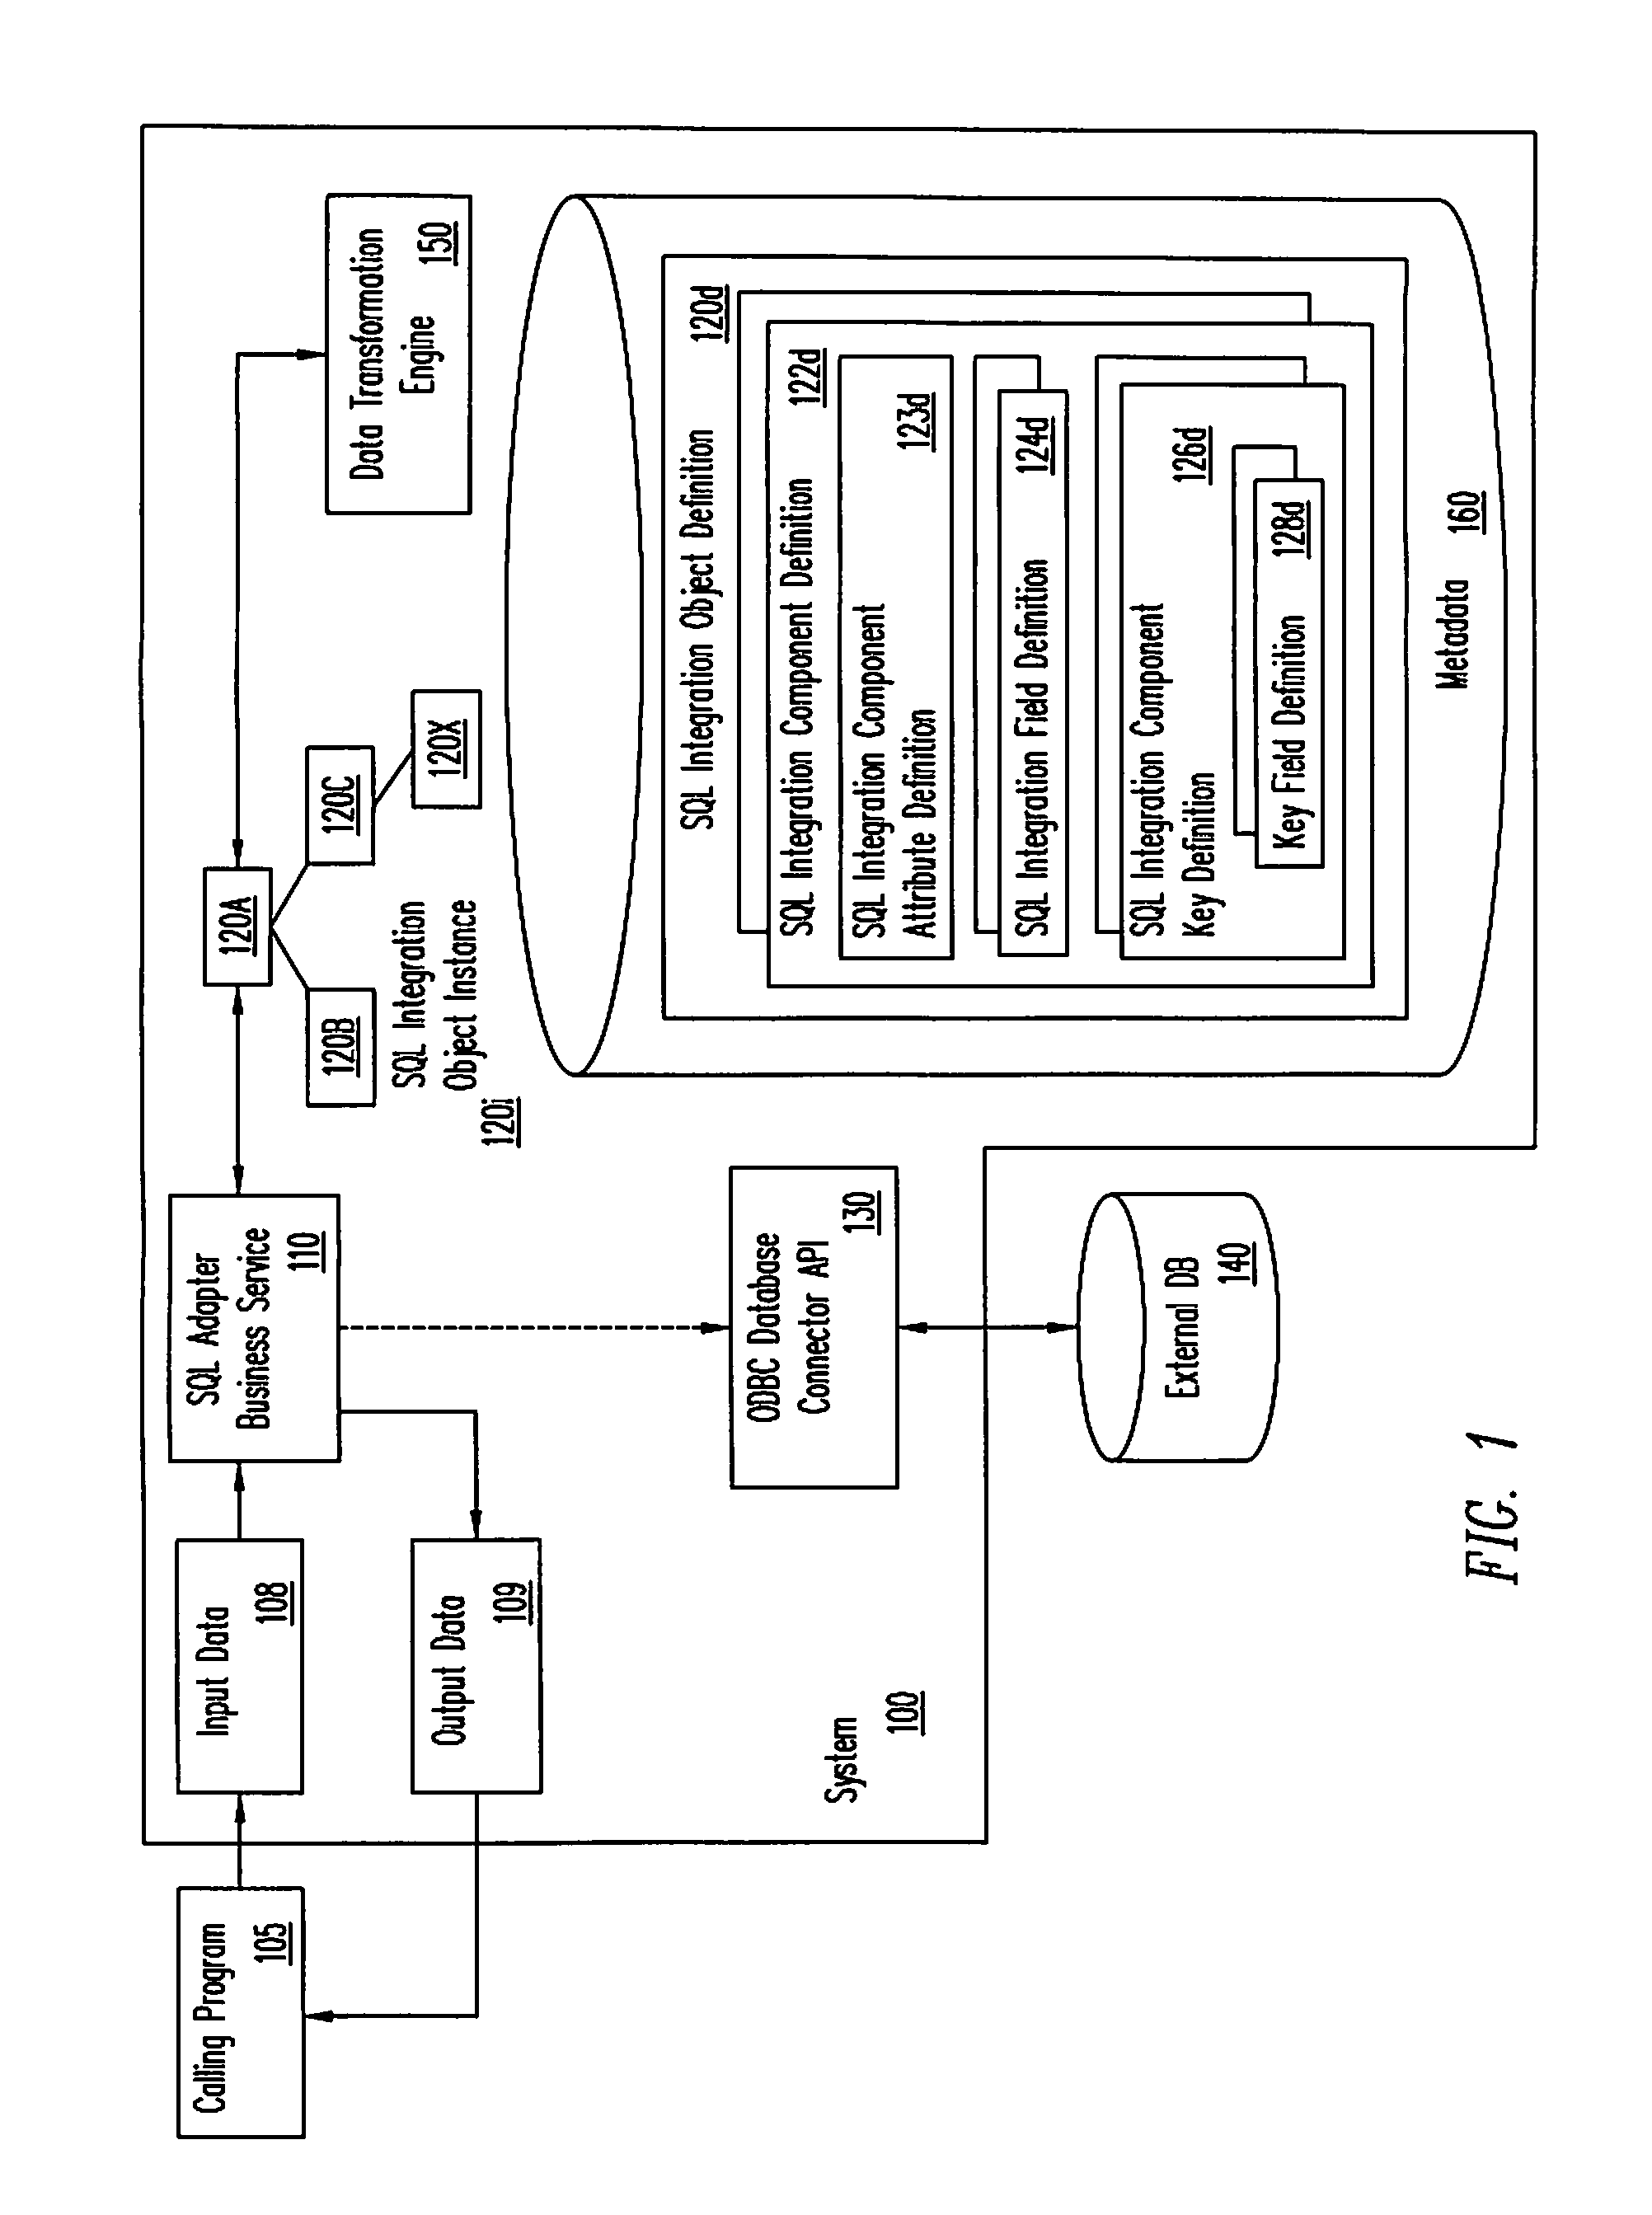 Method and system for an operation capable of updating and inserting information in a database